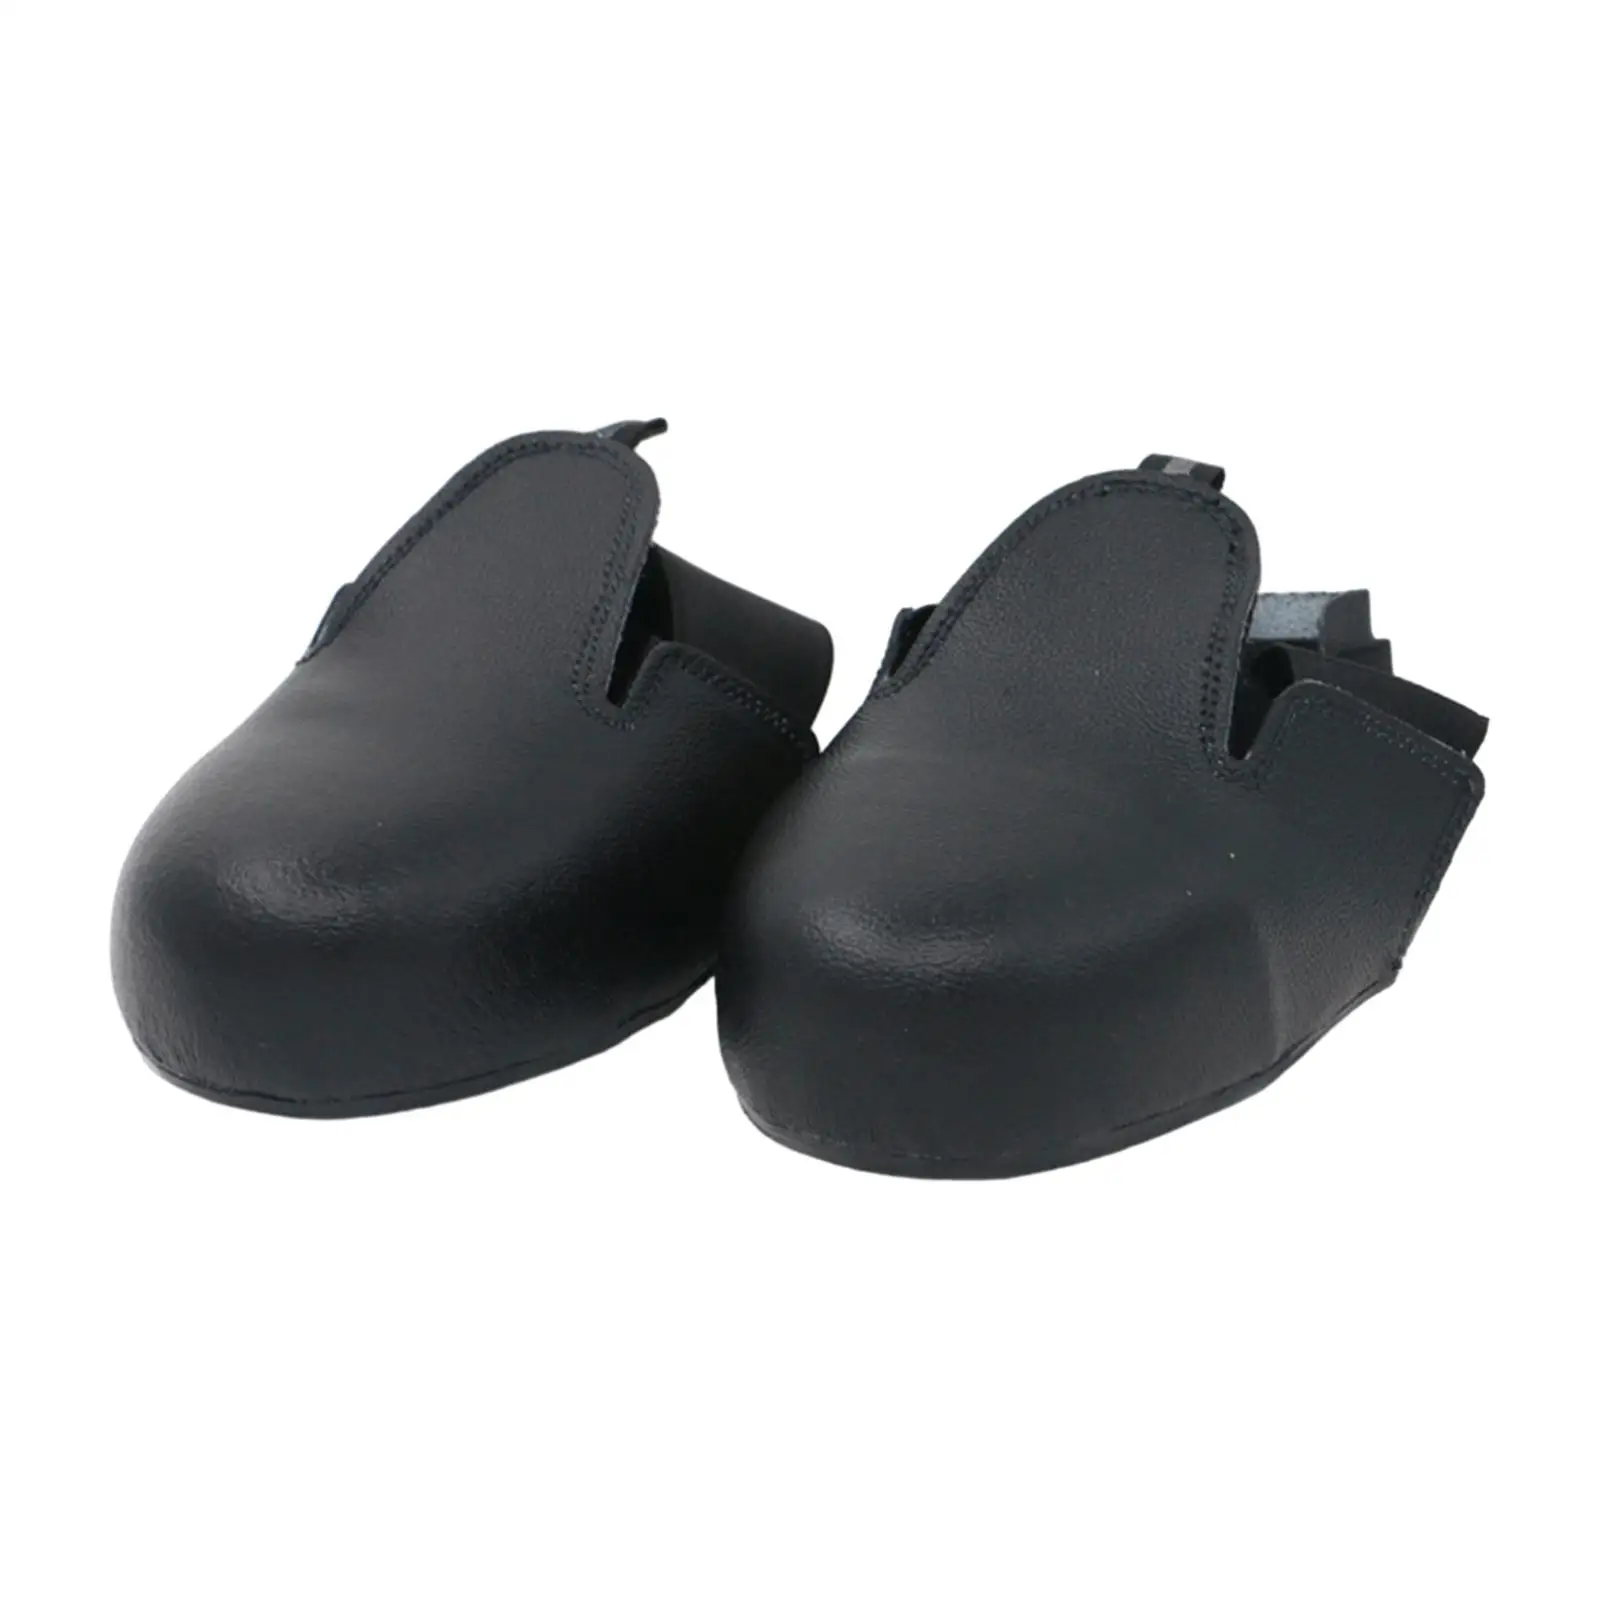 Toe Cap Safety Overshoes Universal Protective Shoe Cover Anti Slip PU Leather Sole Caps for Workplace Toe Cap Safety Shoe Covers